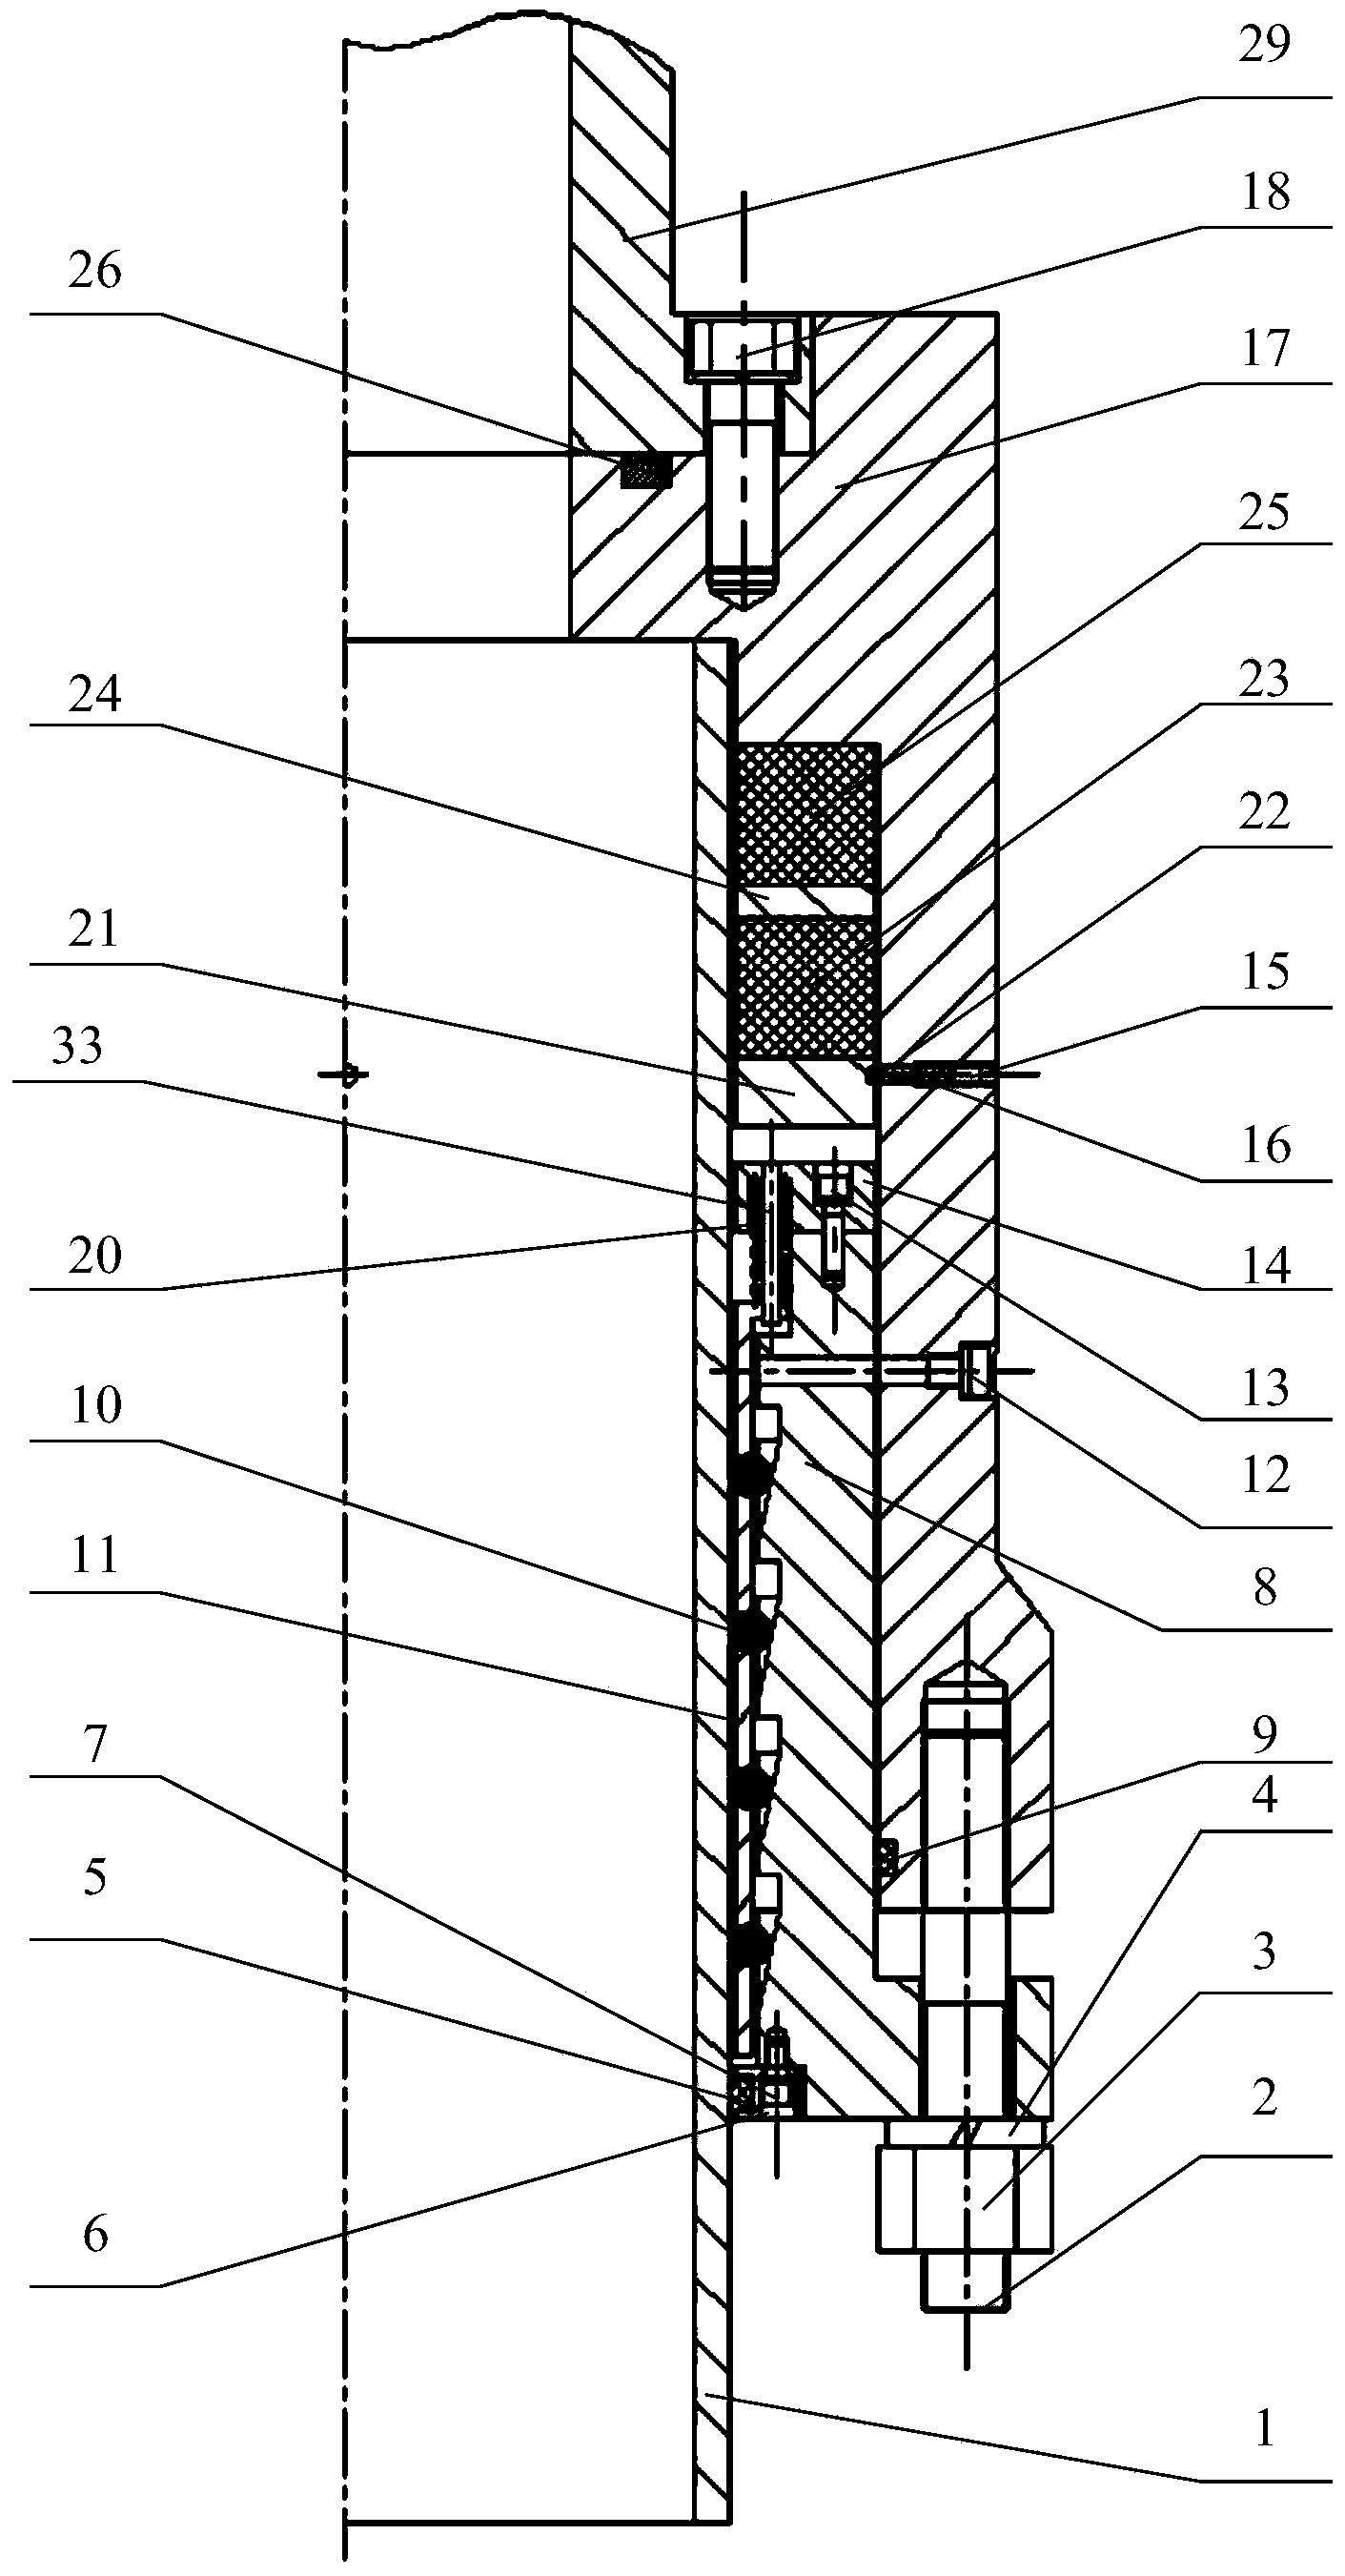 Self-adaptive double-sealing-steel-ball clamping underwater pipeline connector